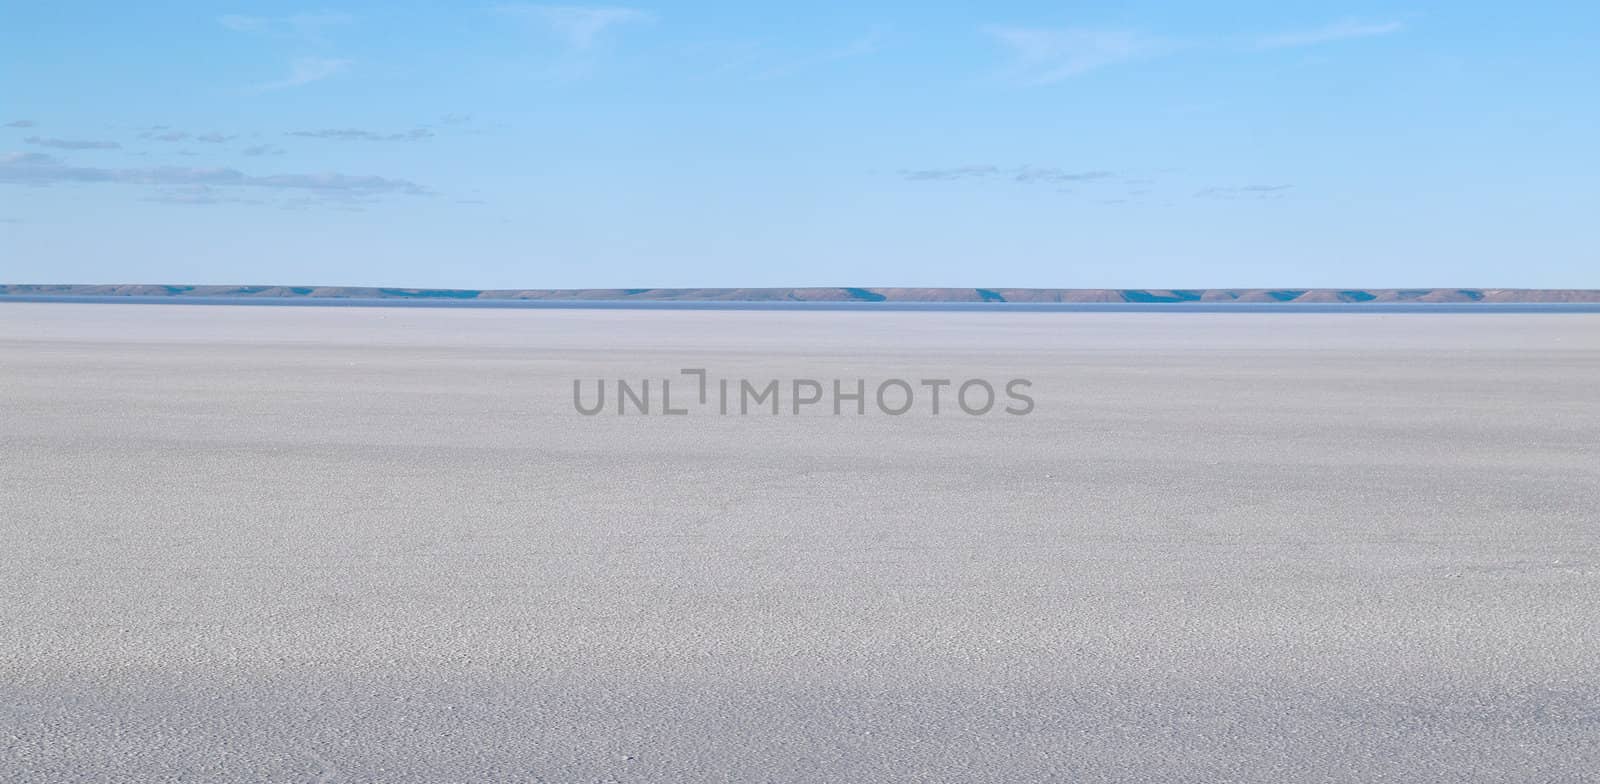 great image of a salt lake in australian outback